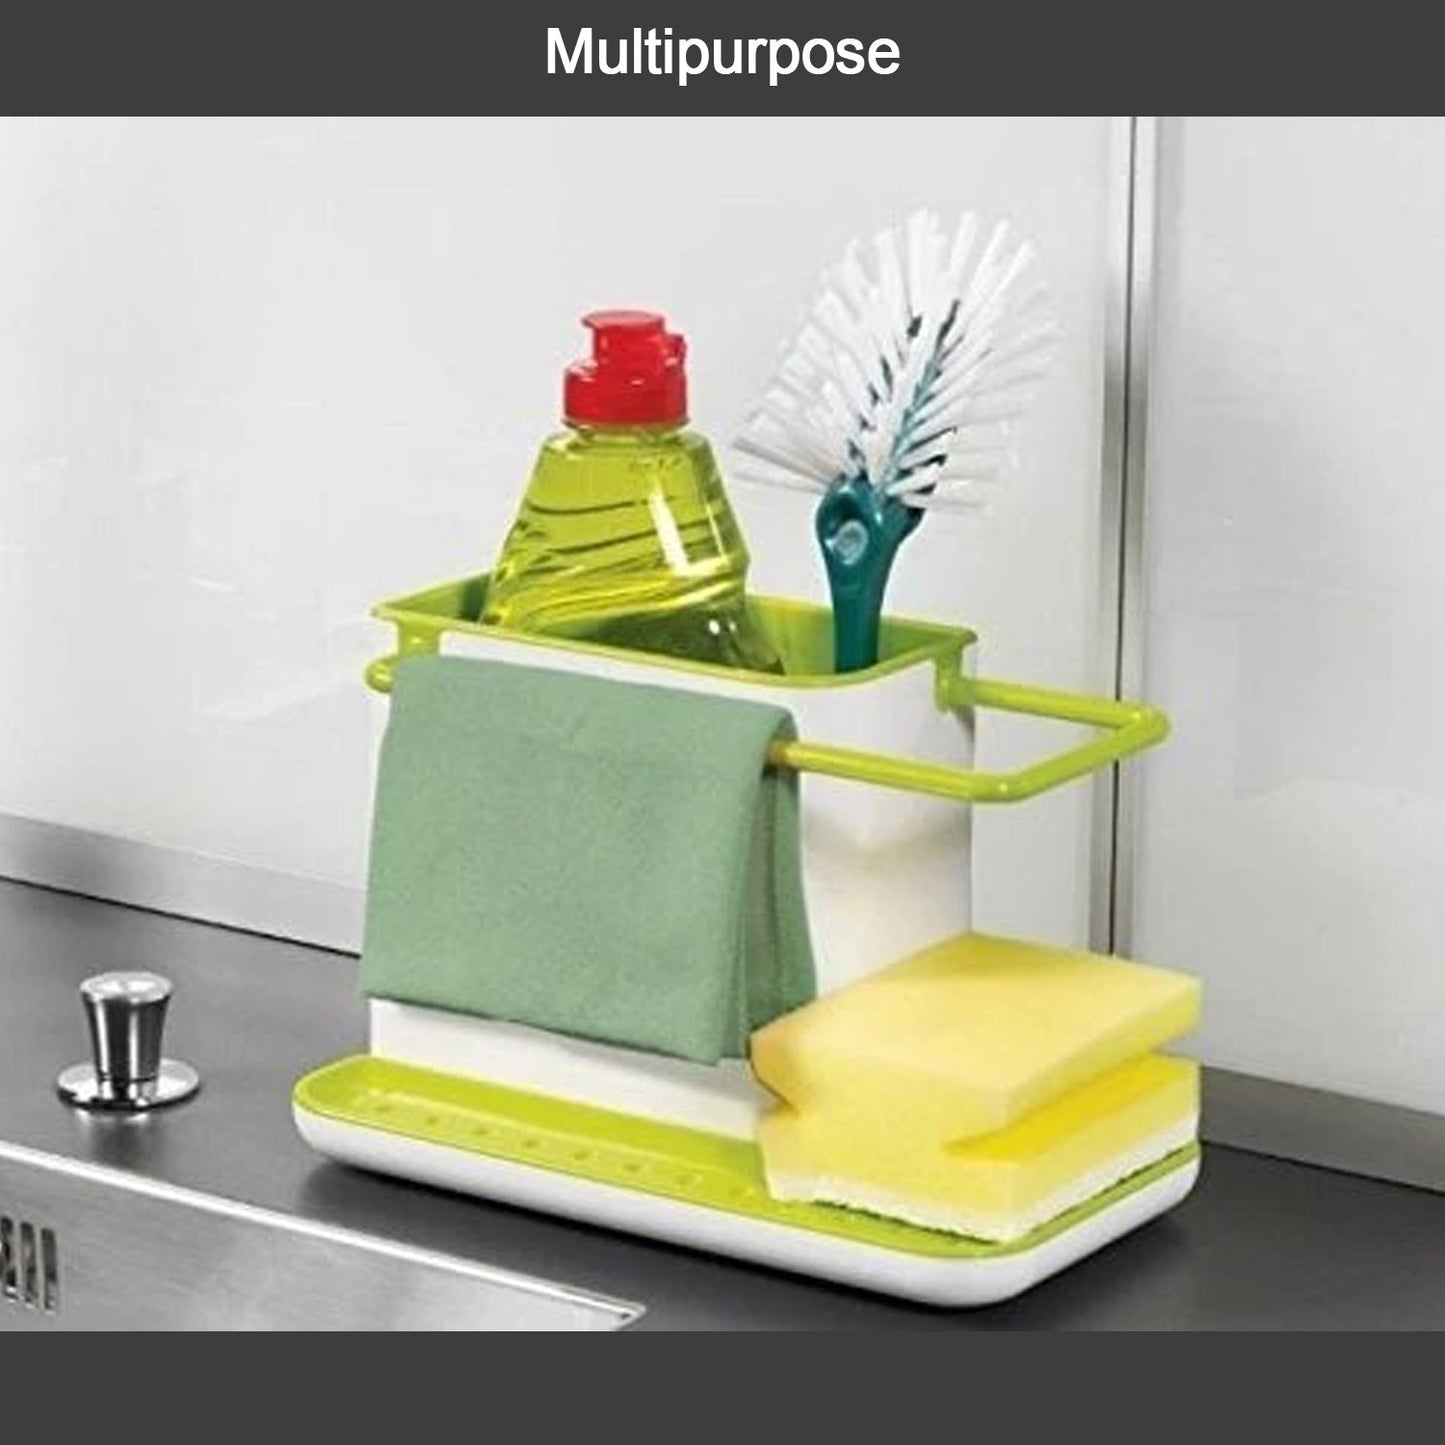 2155A Plastic 3-in-1 Stand for Kitchen Sink Organizer Dispenser for Dishwasher Liquid Dukandaily